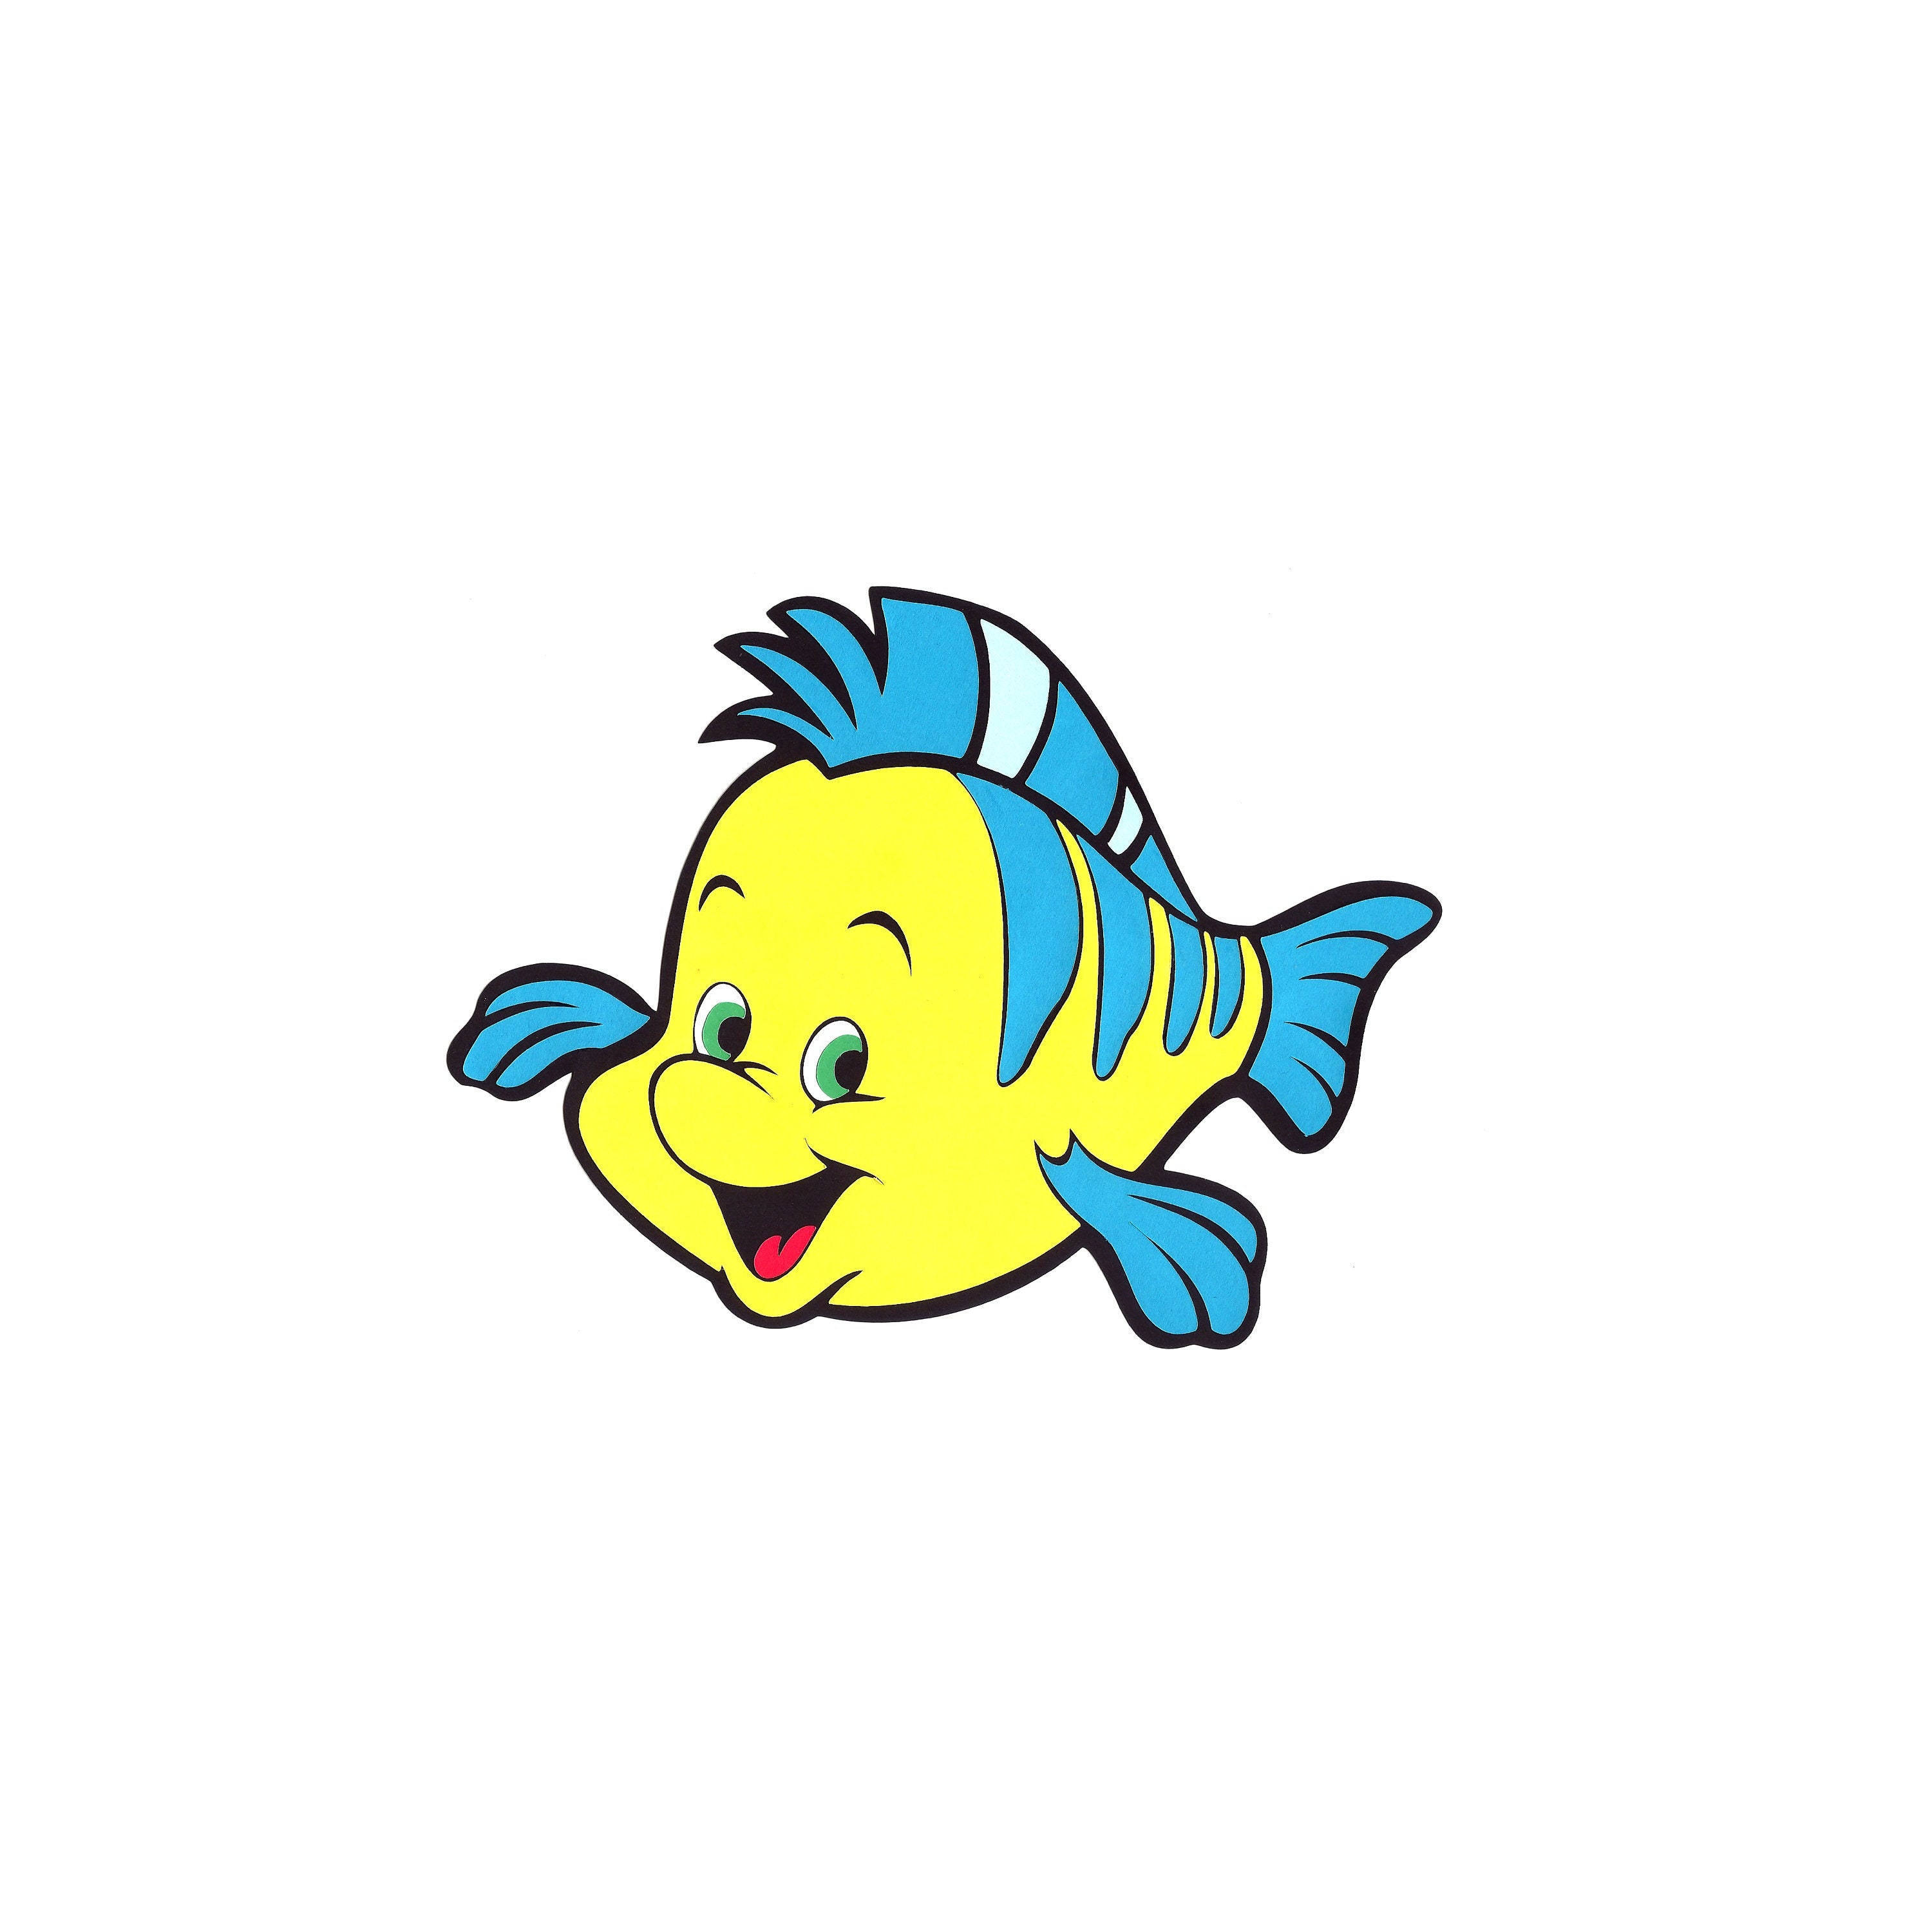 The Little Mermaid: What kind of fish is Flounder? A marine